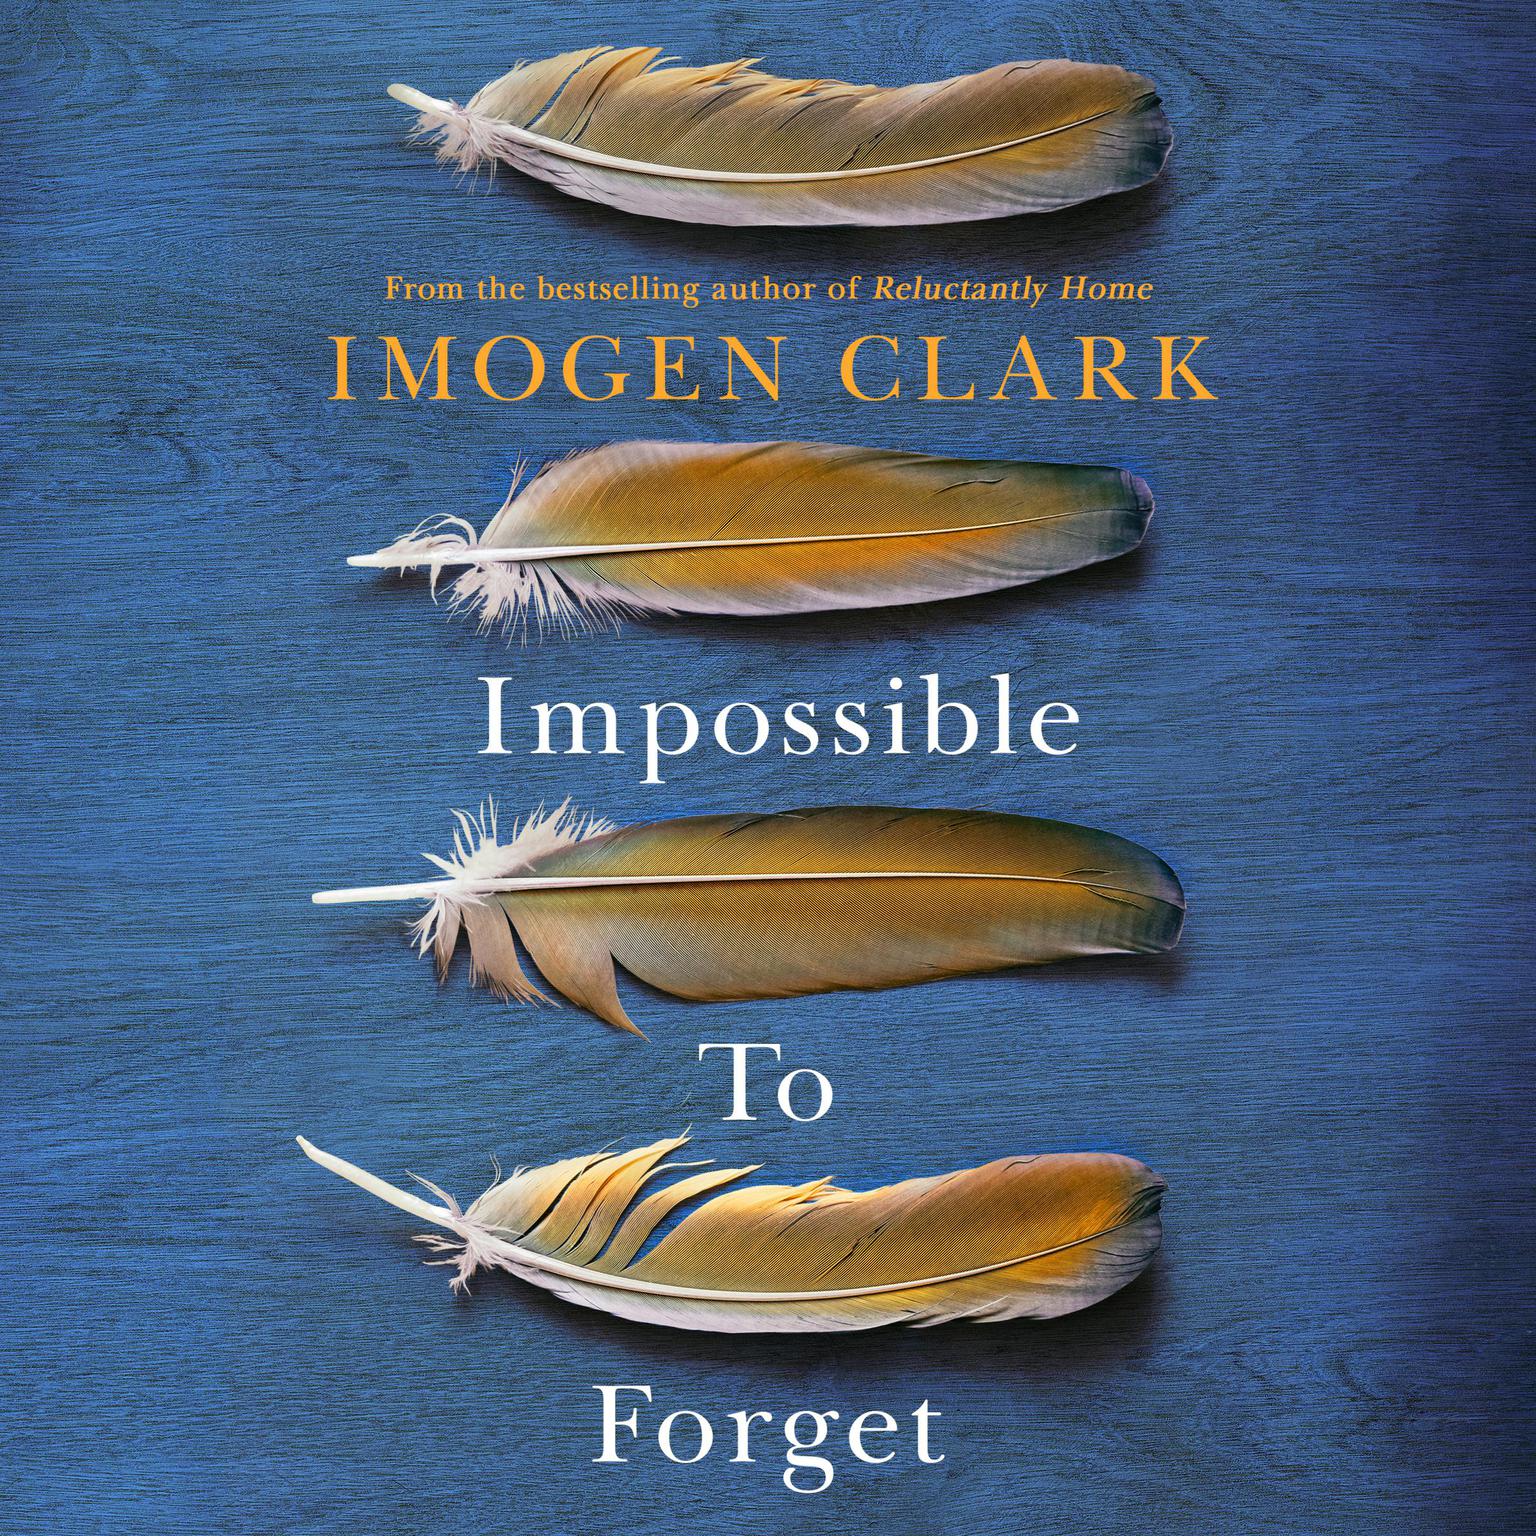 Impossible to Forget Audiobook, by Imogen Clark